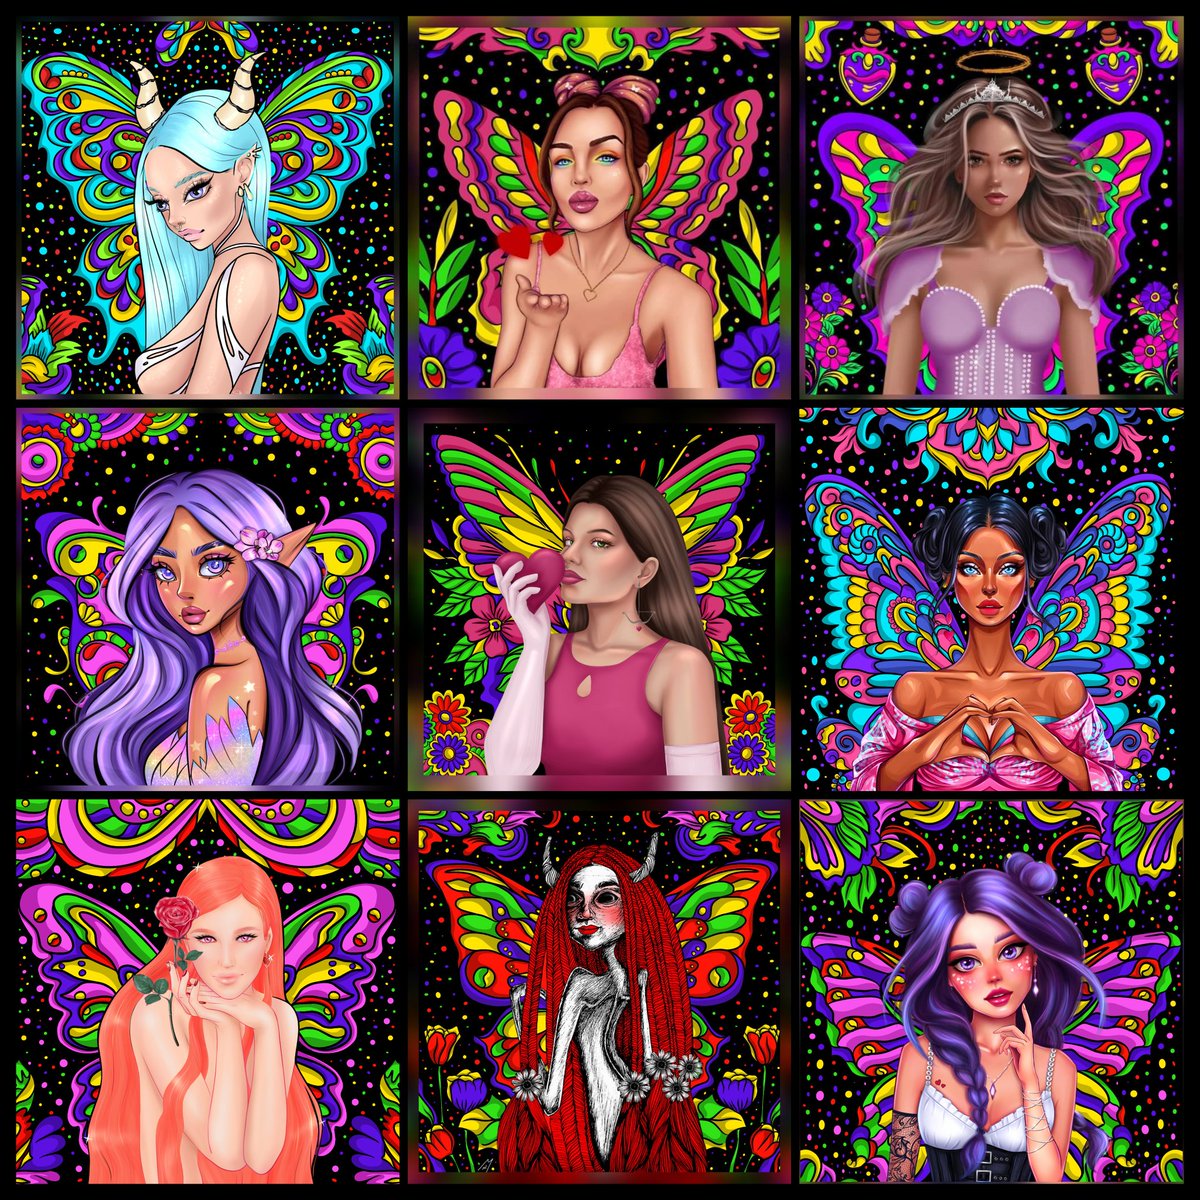 GM Fam ❤️
It's #WomensHistoryMonth 😇

This month is very special to all women in the world, Can we make this more lovely with your kind support Fam, Colourful Collab with my #WomenArtists partners ✨

Starting - 6 #xtz  
Kindly Support friends 🫂🫶